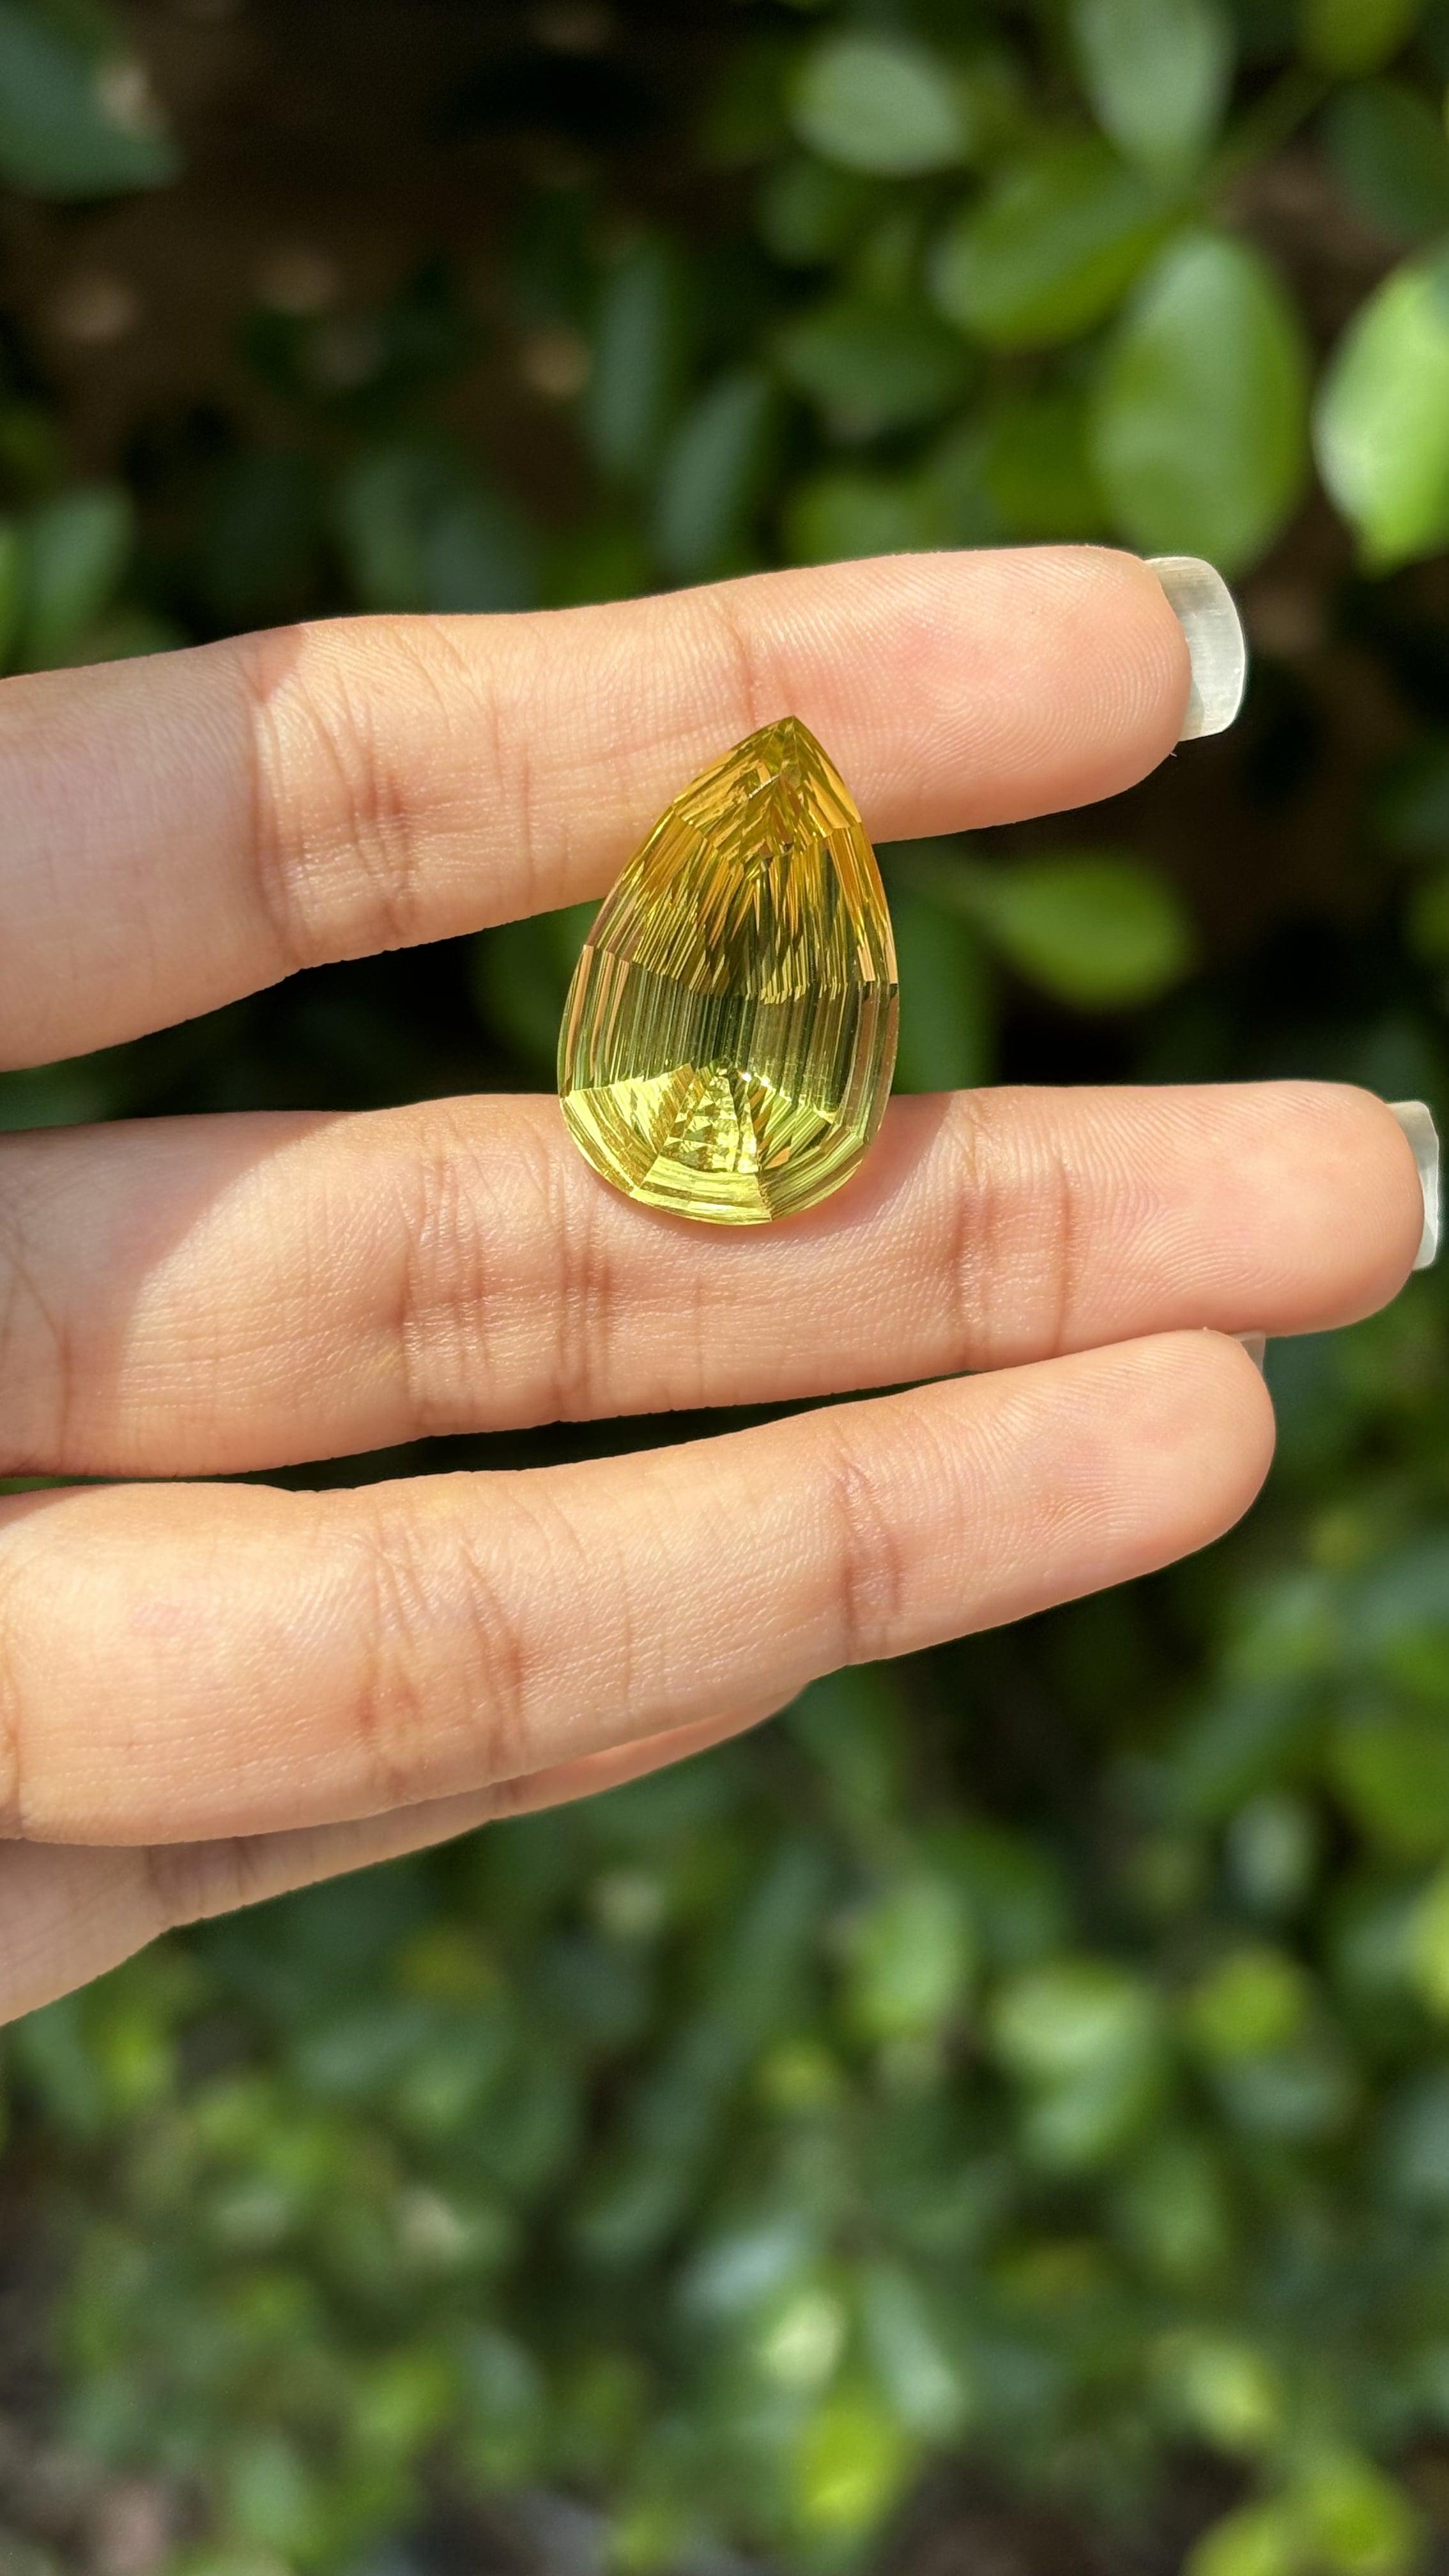 A 21.60 Carat Citrine gemstone, resplendent in hues of vivid yellowish-orange. The Citrine is cut to perfection in a pear shape.

Citrine has been cherished since the ancient times. The Romans used it for beautiful jewelry and intaglio work, while